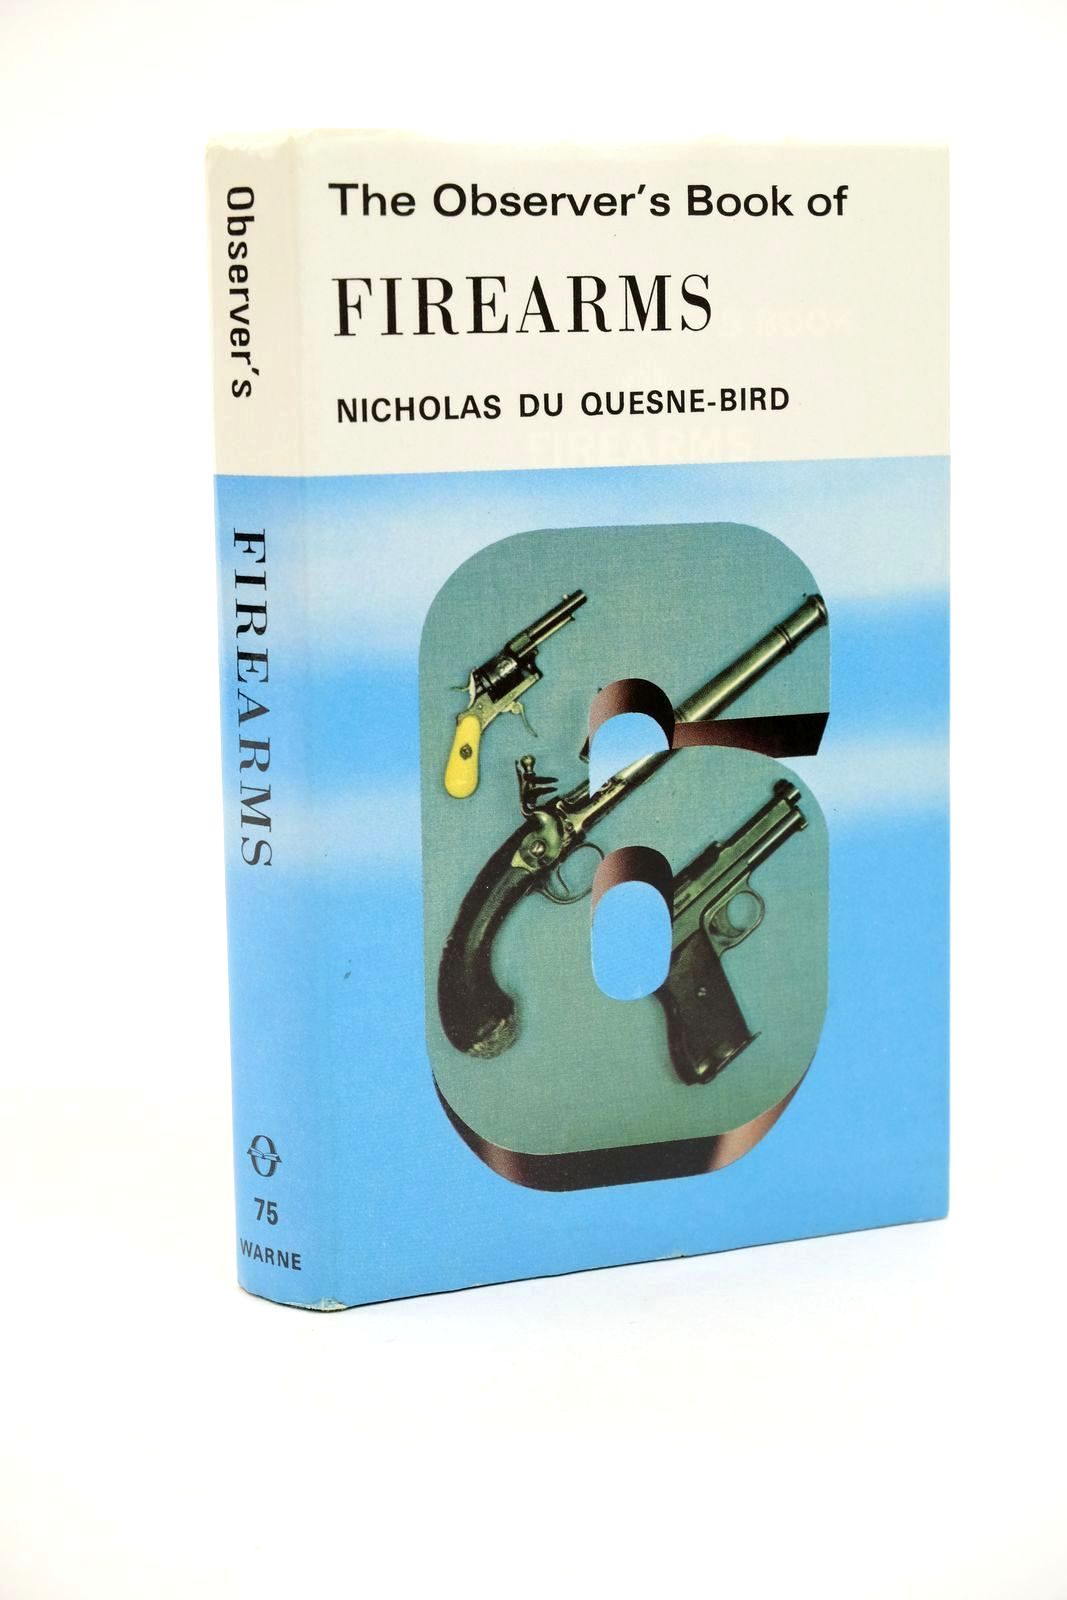 Photo of THE OBSERVER'S BOOK OF FIREARMS (CYANAMID WRAPPER) written by Du Quesne-Bird, Nicholas published by Frederick Warne (Publishers) Ltd. (STOCK CODE: 1323051)  for sale by Stella & Rose's Books